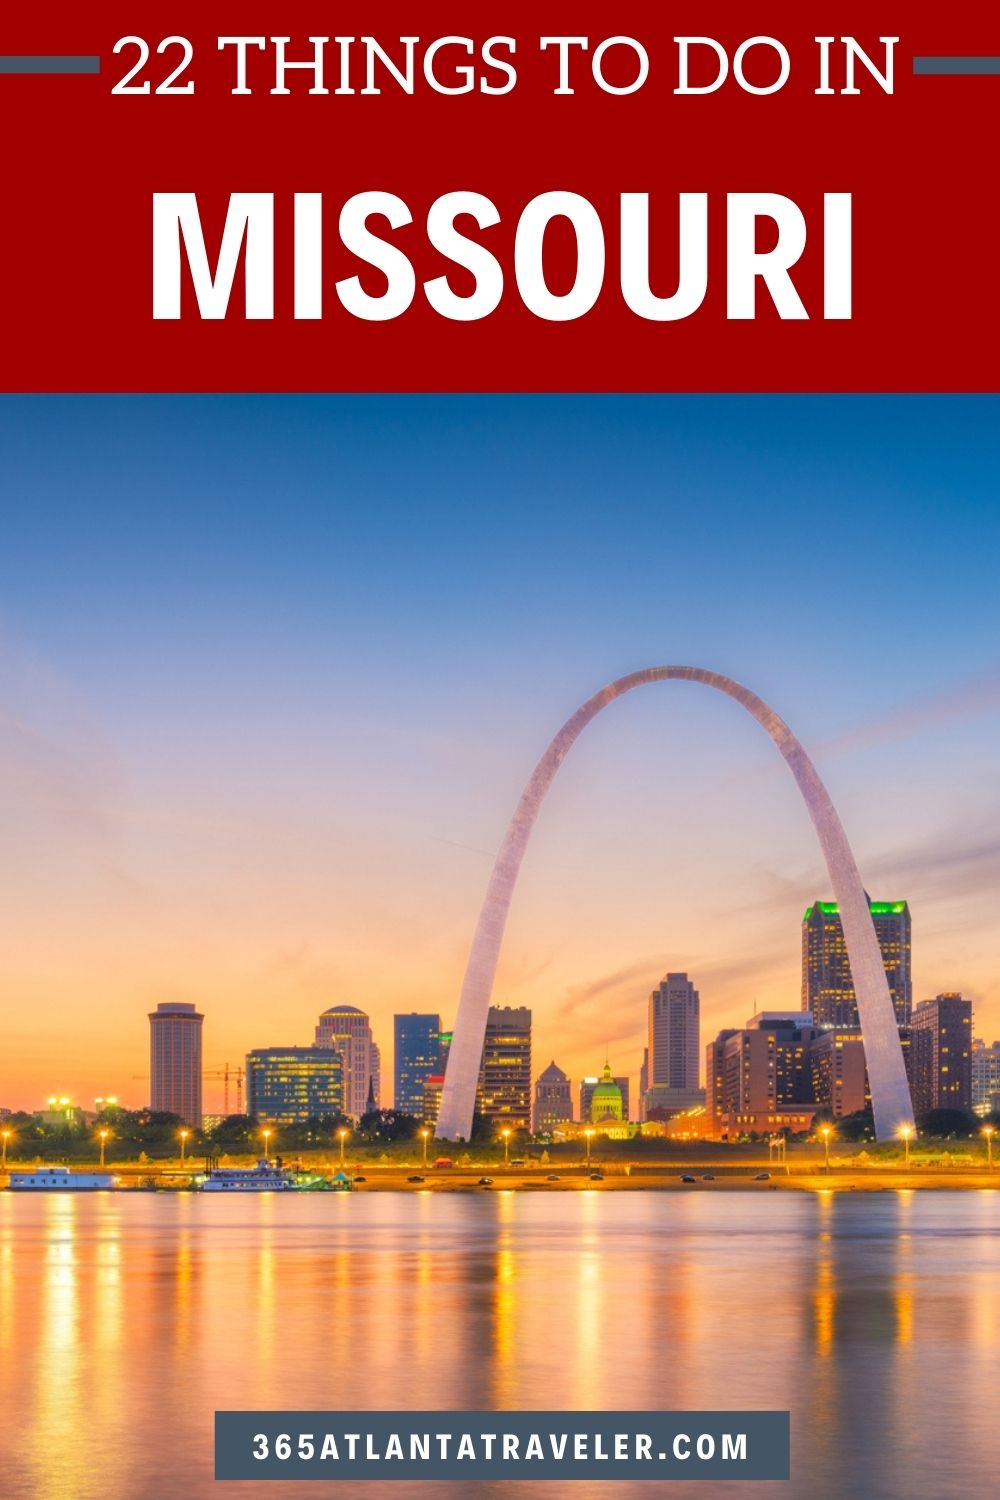 22 THINGS TO DO IN MISSOURI YOU'RE GOING TO LOVE